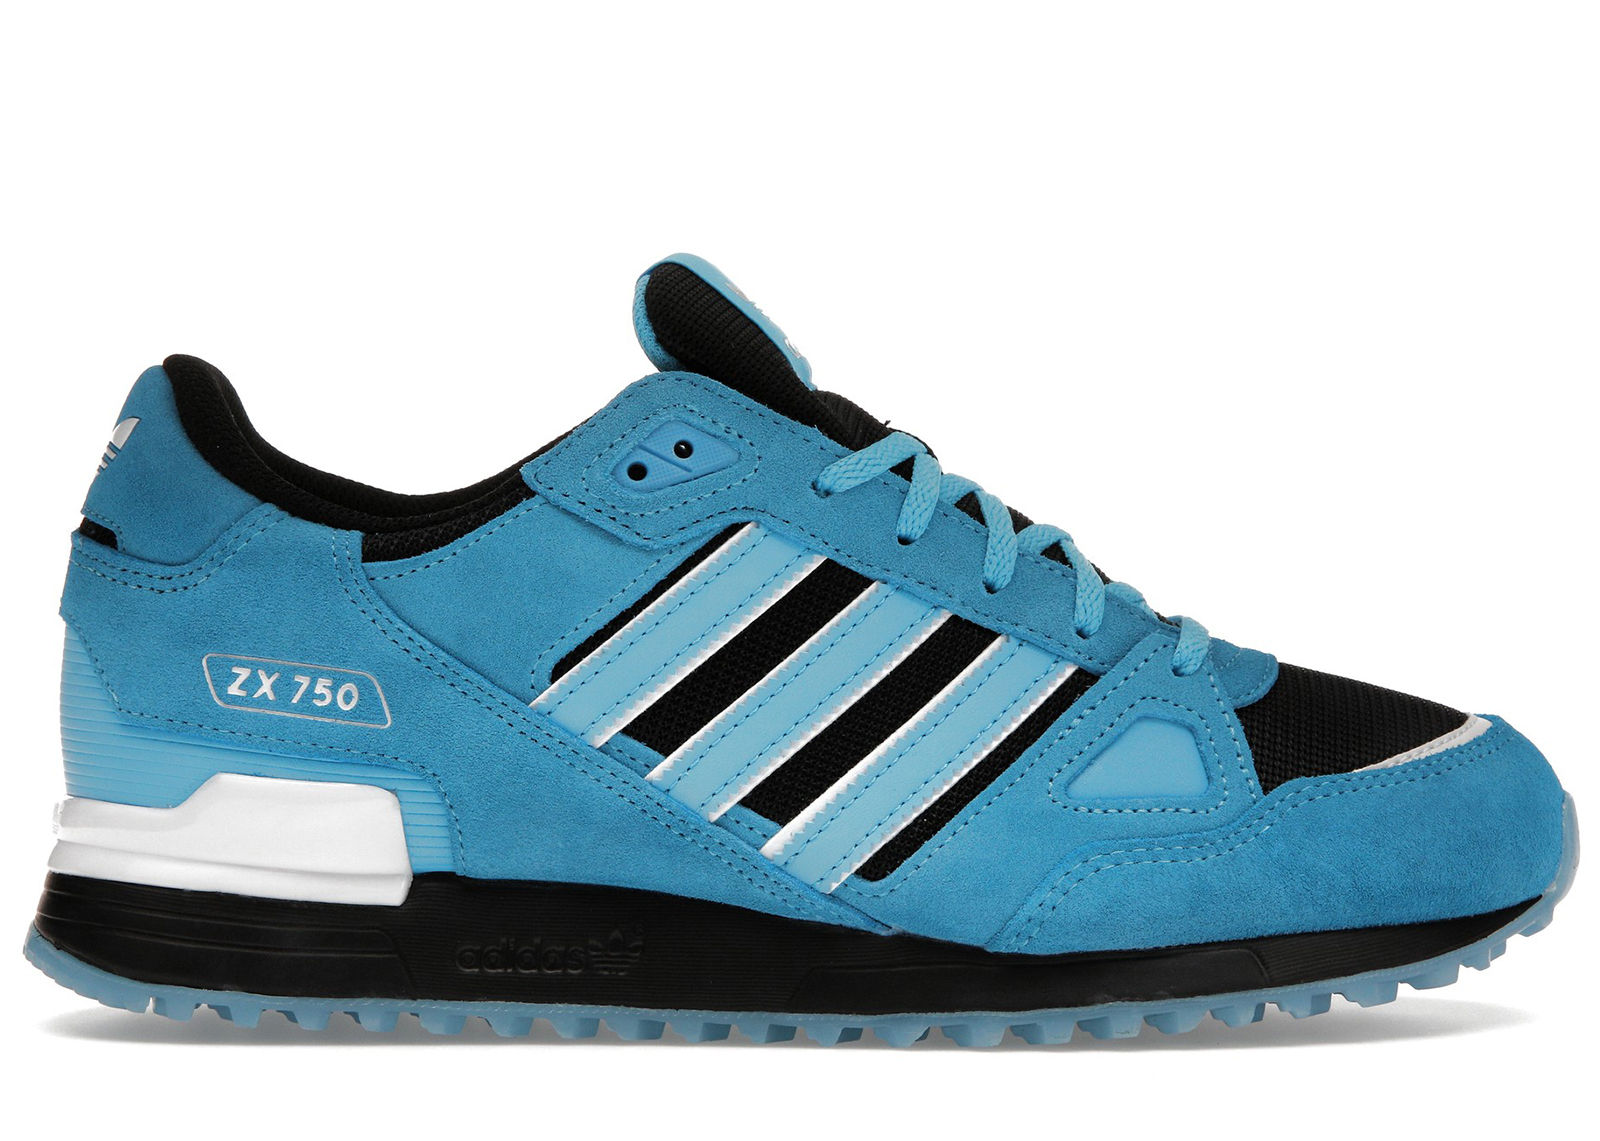 Buy adidas ZX 750 Shoes & New Sneakers - StockX